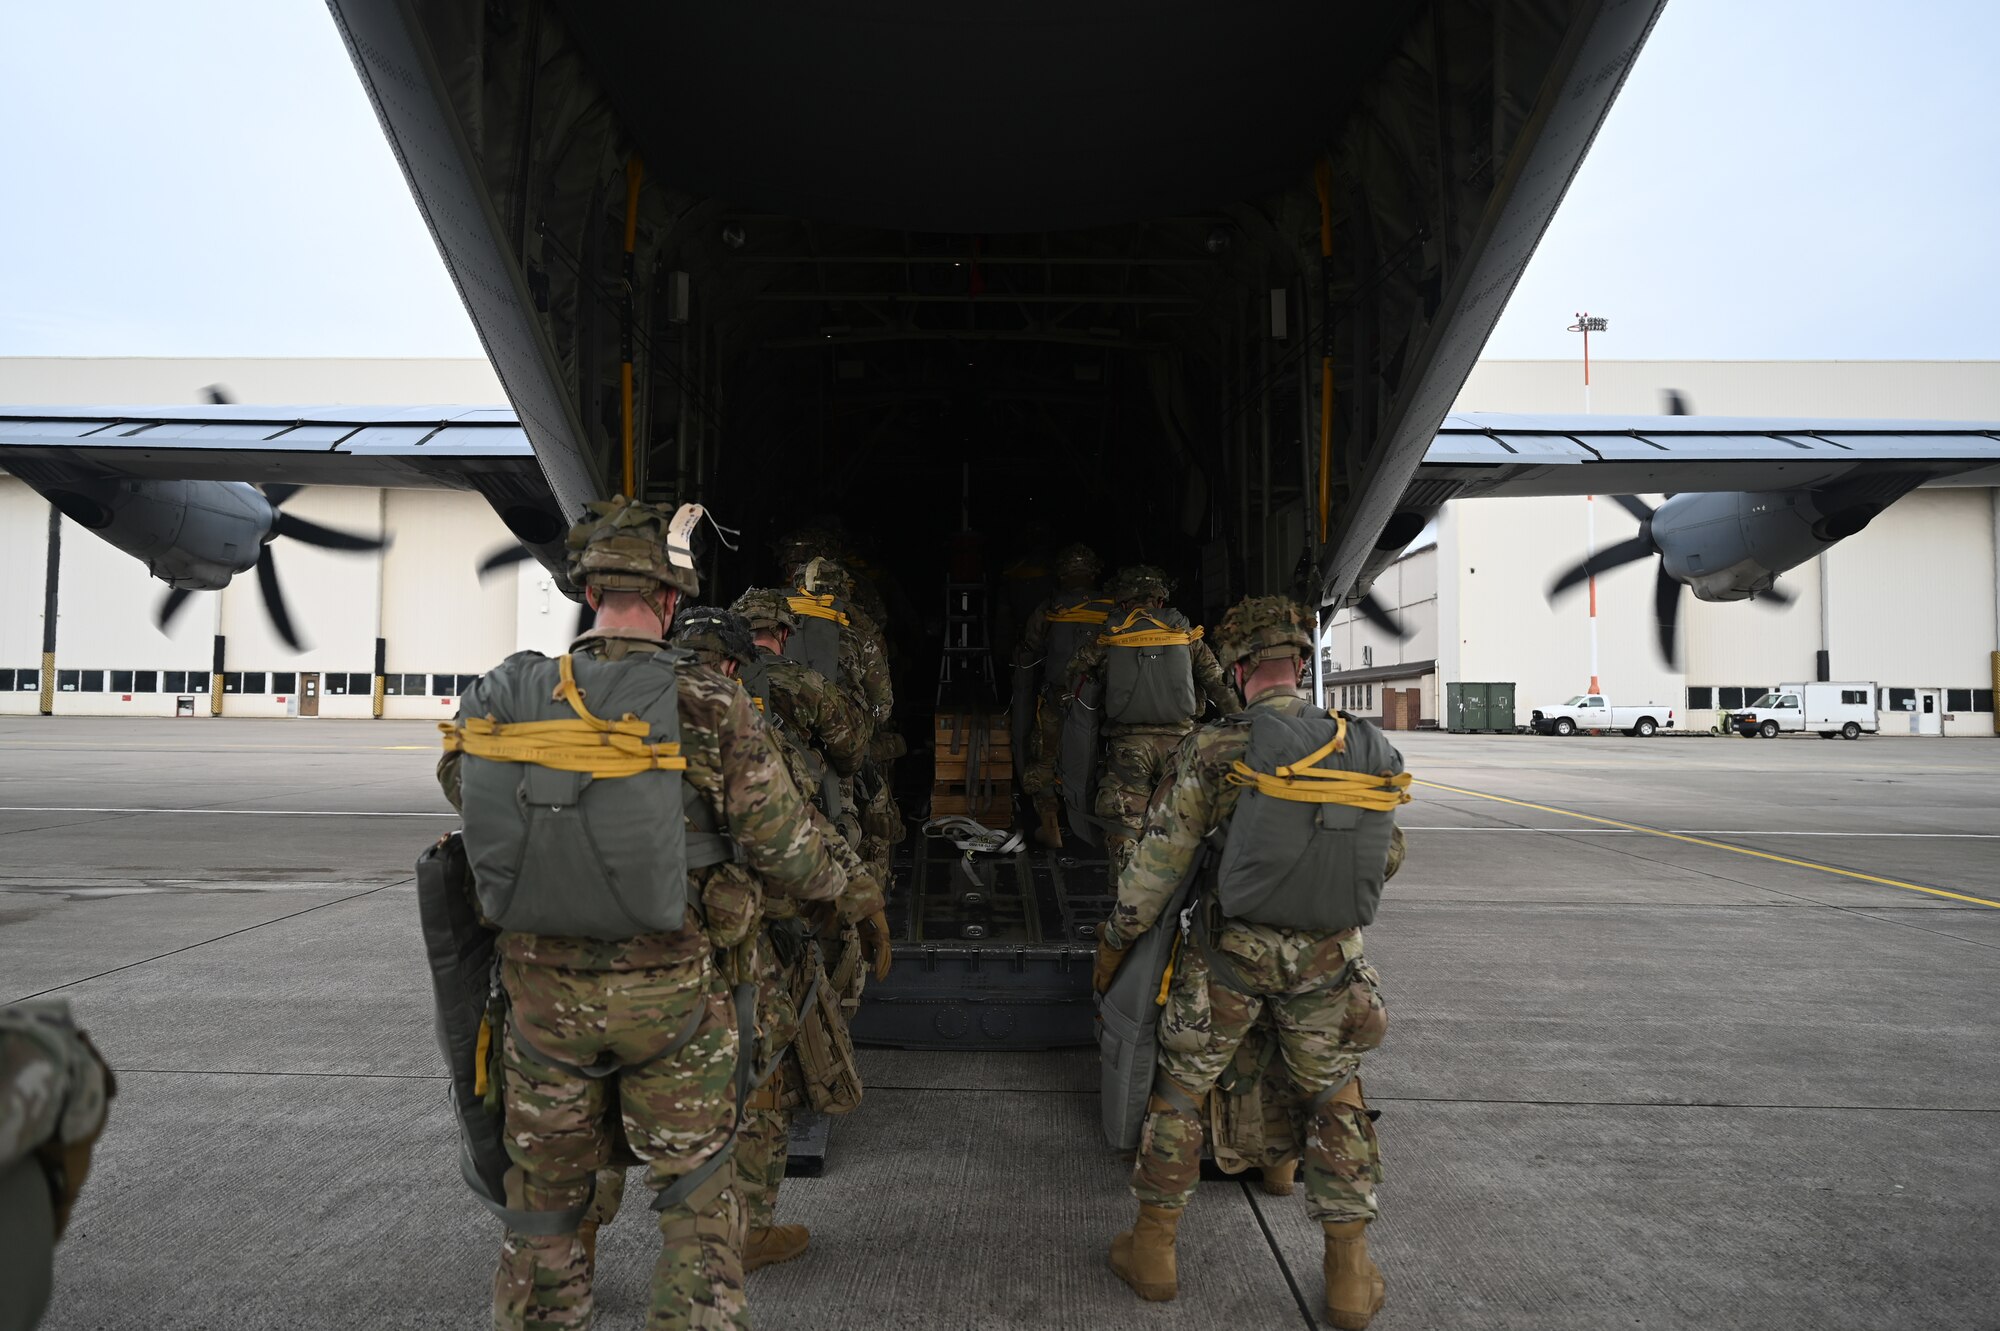 U.S. Army paratroopers assigned to the 1st Squadron (Airborne), 91st Cavalry Regiment, 173rd Airborne Brigade, assigned to Grafenwoehr Training Area, Germany, board a C-130J Super Hercules aircraft.